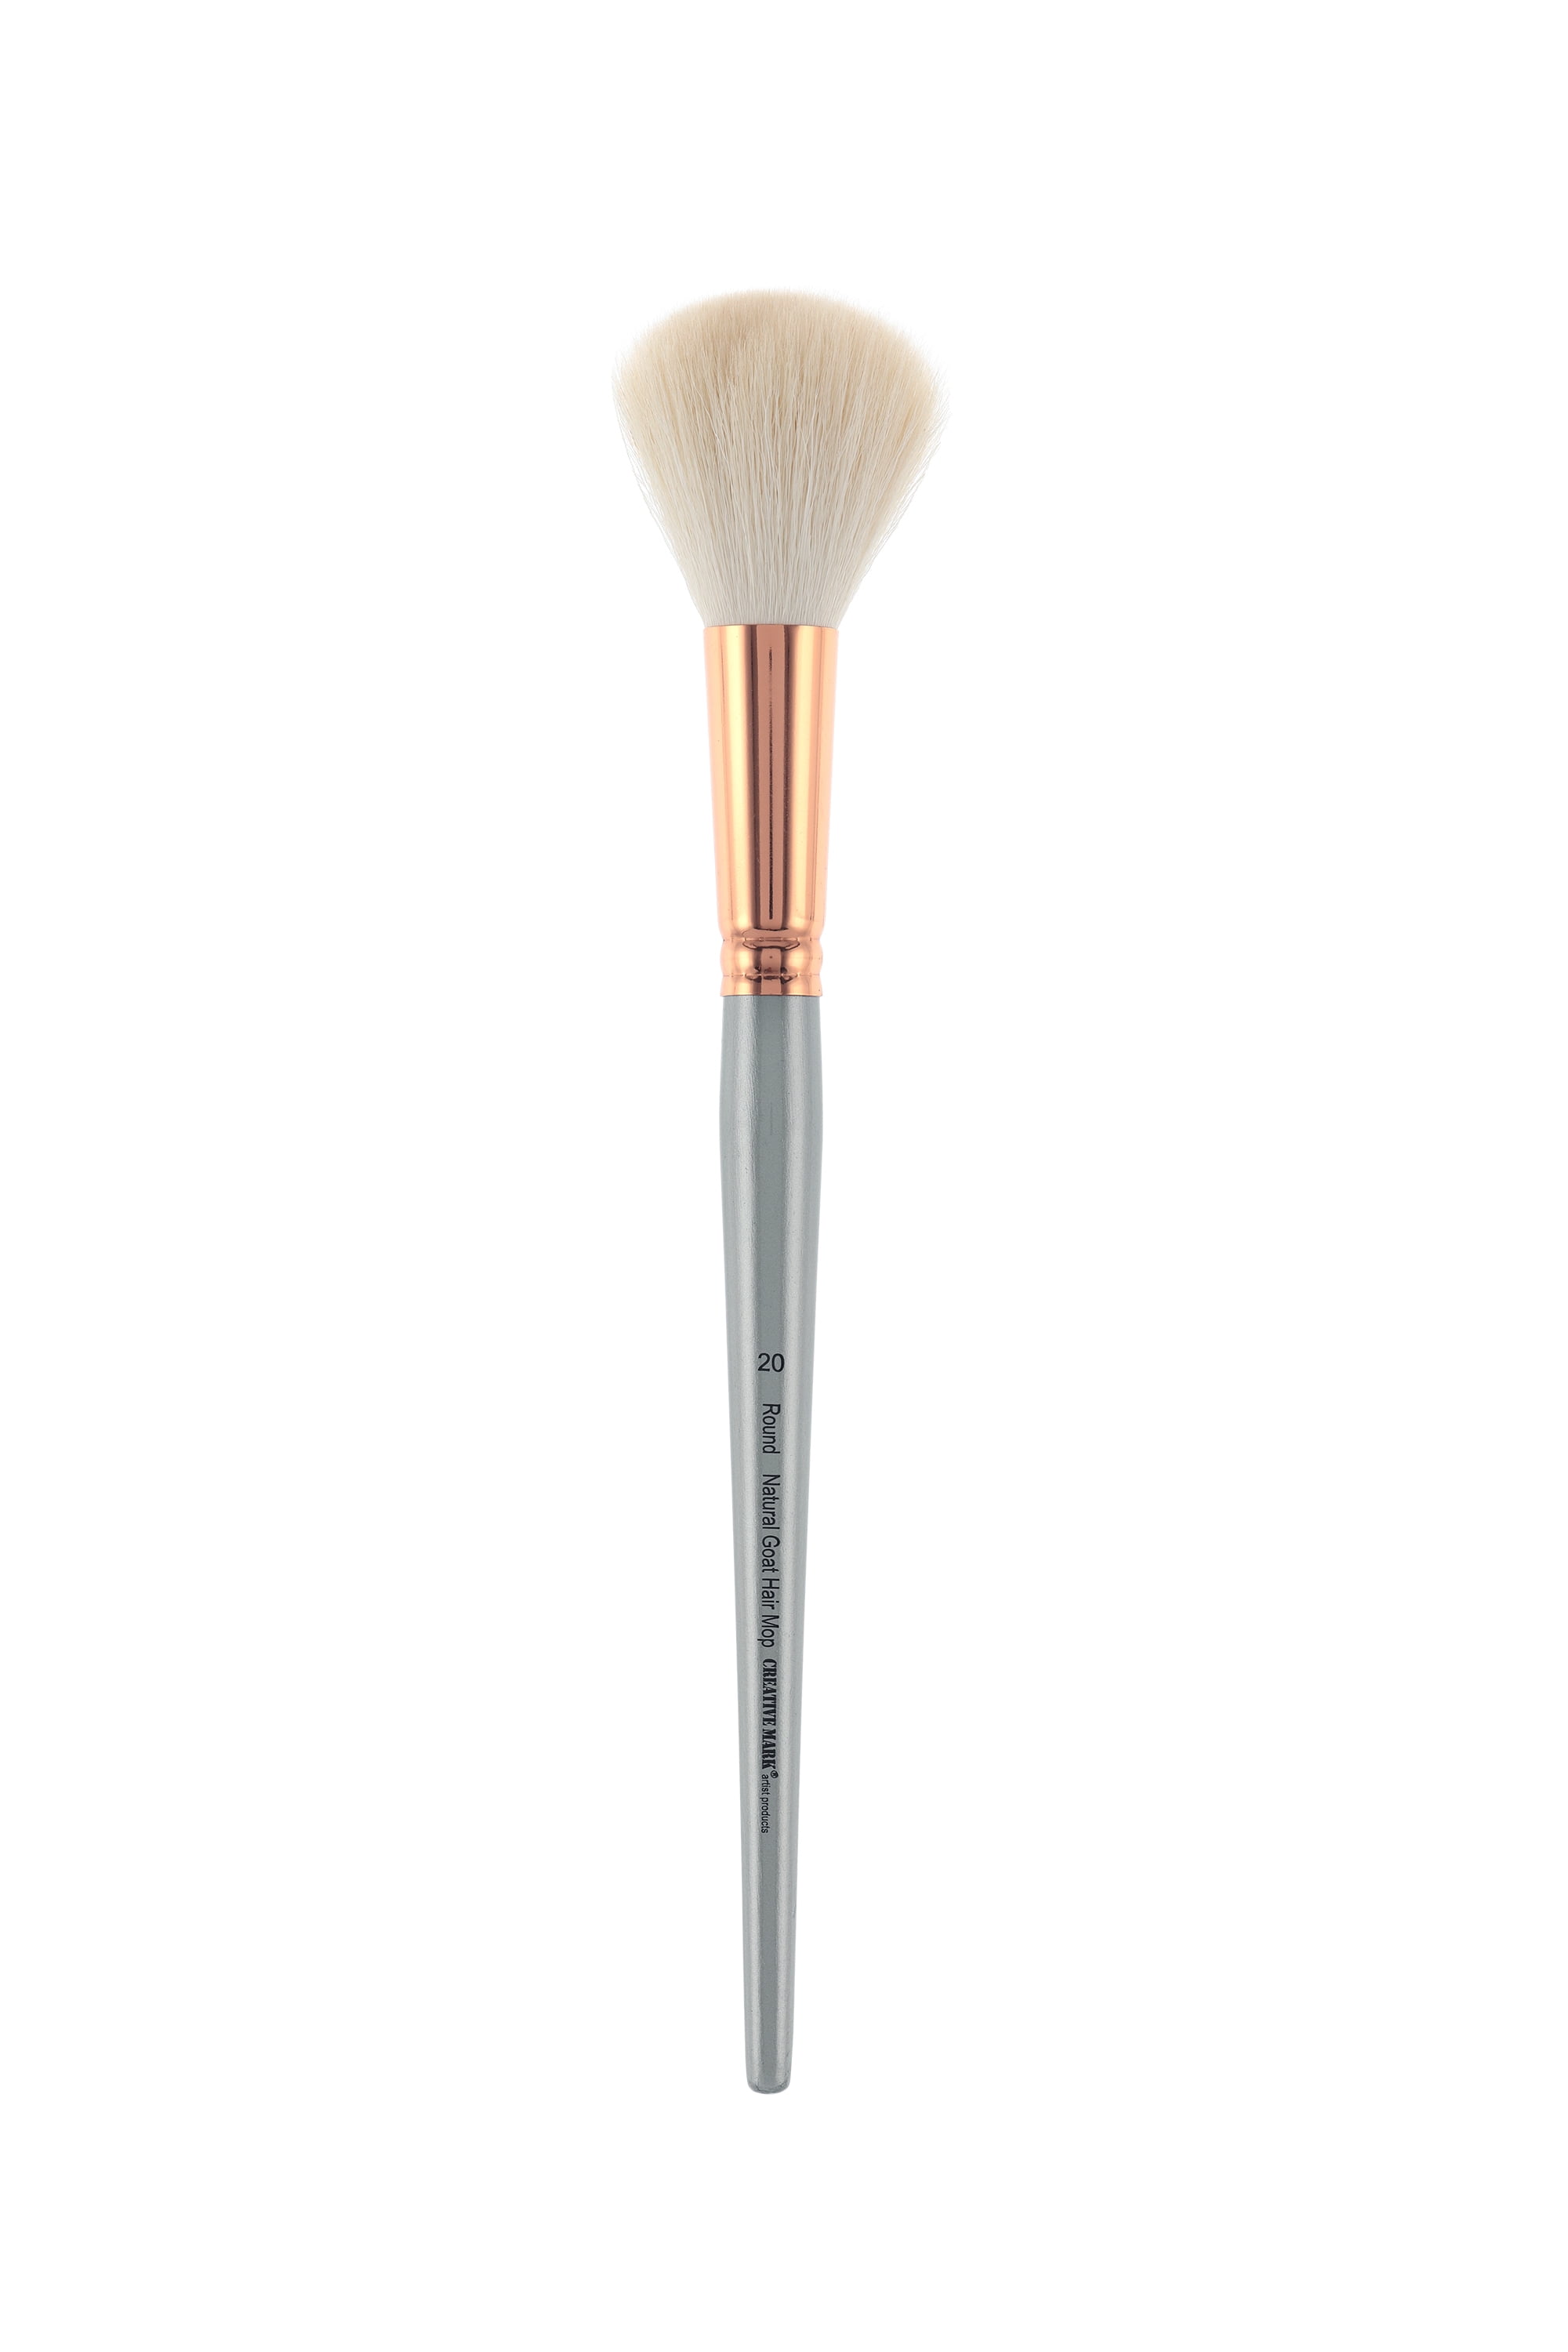 Celebrate Seamless Blending with Mop Brushes: A Comprehensive